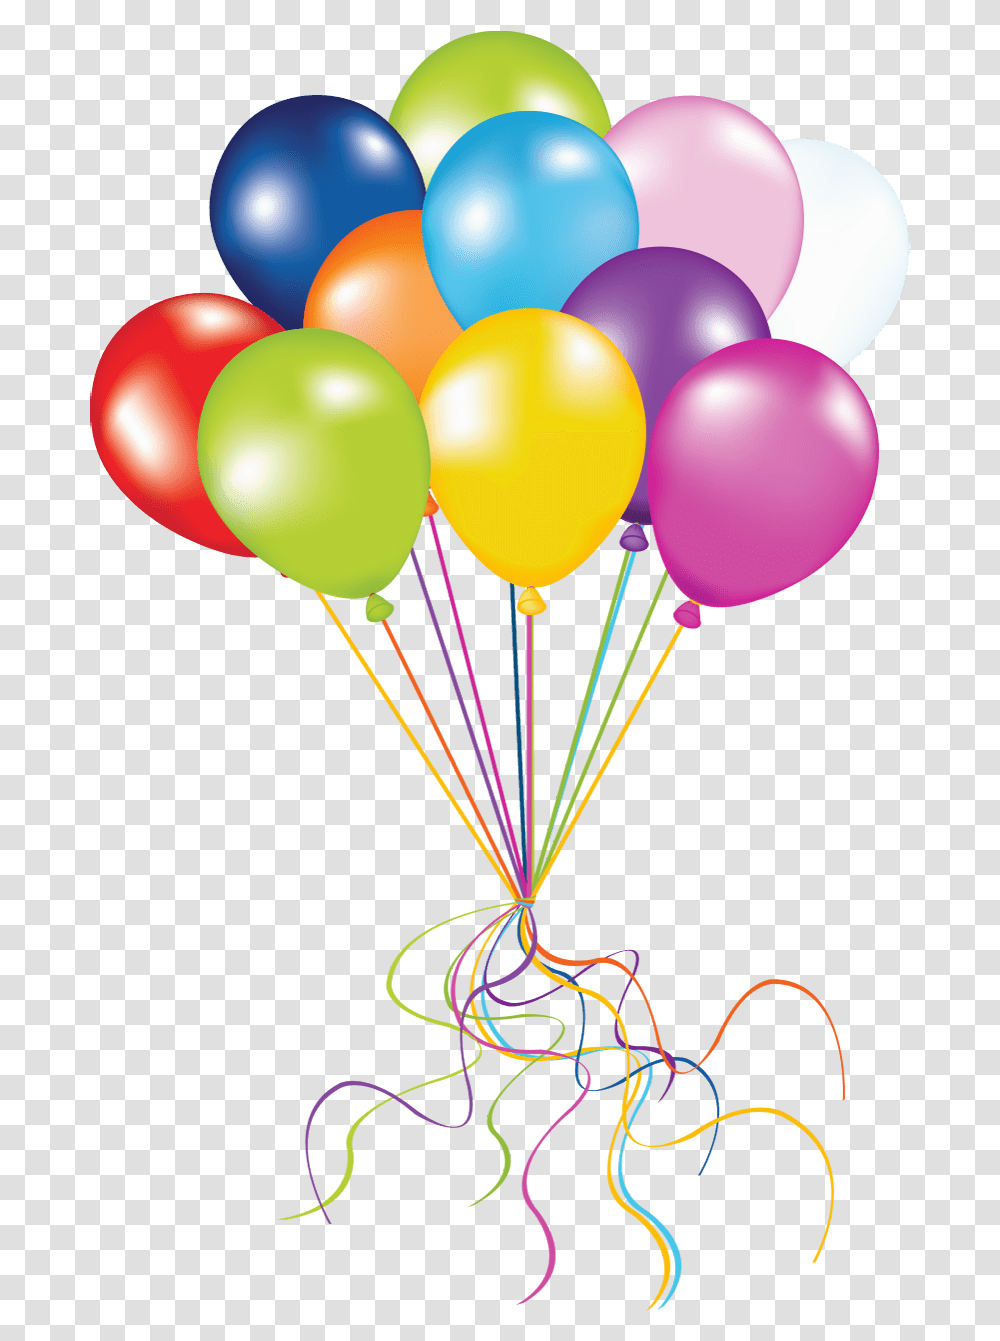 Download Globos Balloon Picture For Free Background Balloons Transparent Png